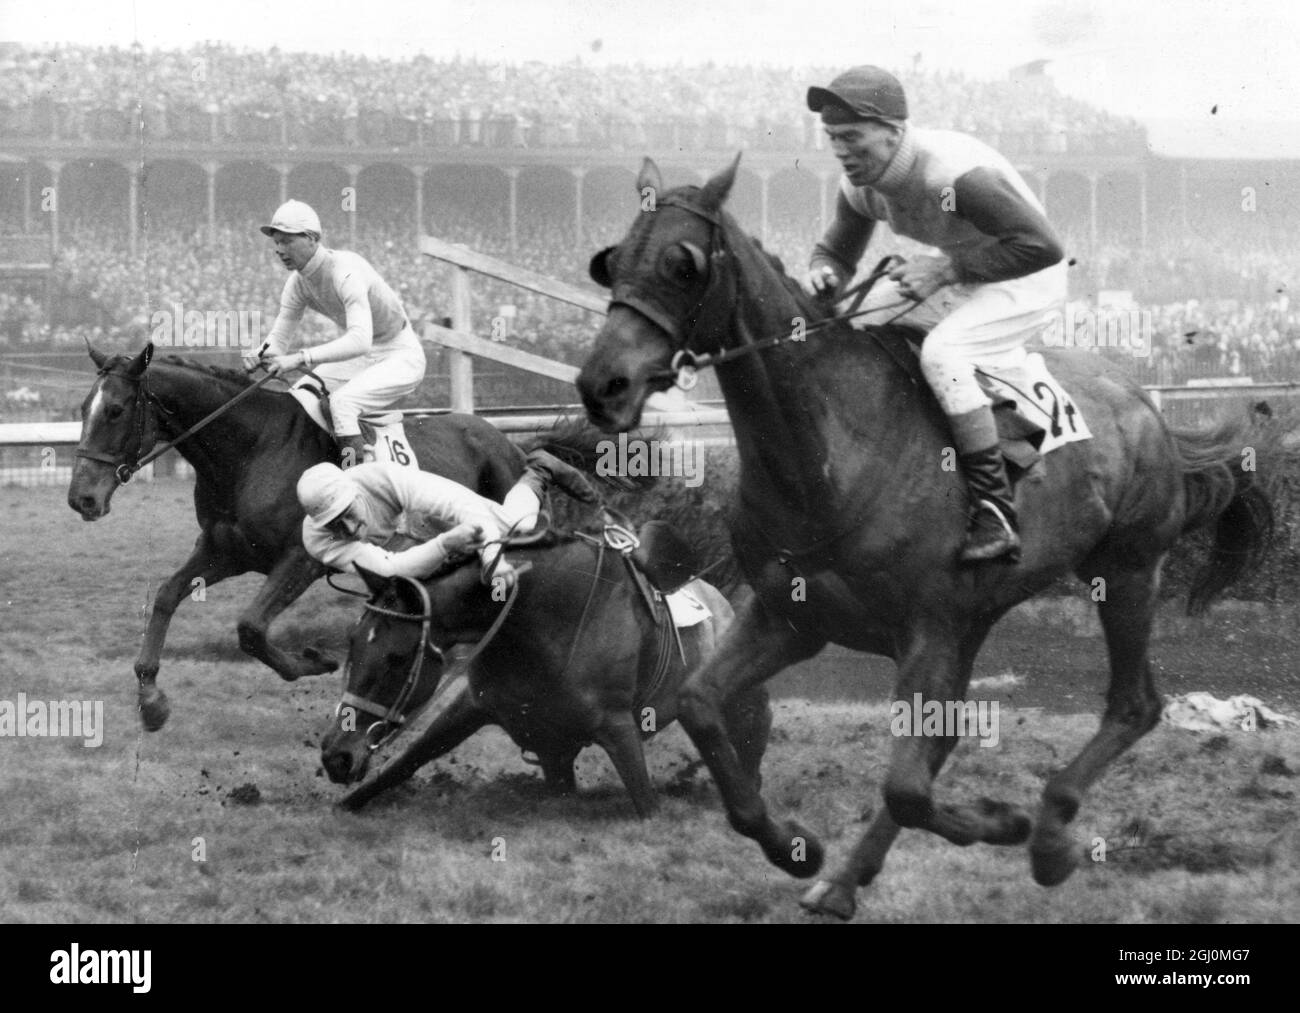 Aintree Liverpool . Grand National won by '' Mr What '' ridden by Arthur Freeman and owned Mr DJ Coughlan . Second was Tiberetta and third was Green Dill Fall at Water Jump '' Richardstown '' ridden by T Taffe is shown falling nearest camera is '' Pippykin '' ridden by T Brookshaw and at far side is '' Sydney Jones '' ridden by M Tory . 29 March 1958 Stock Photo